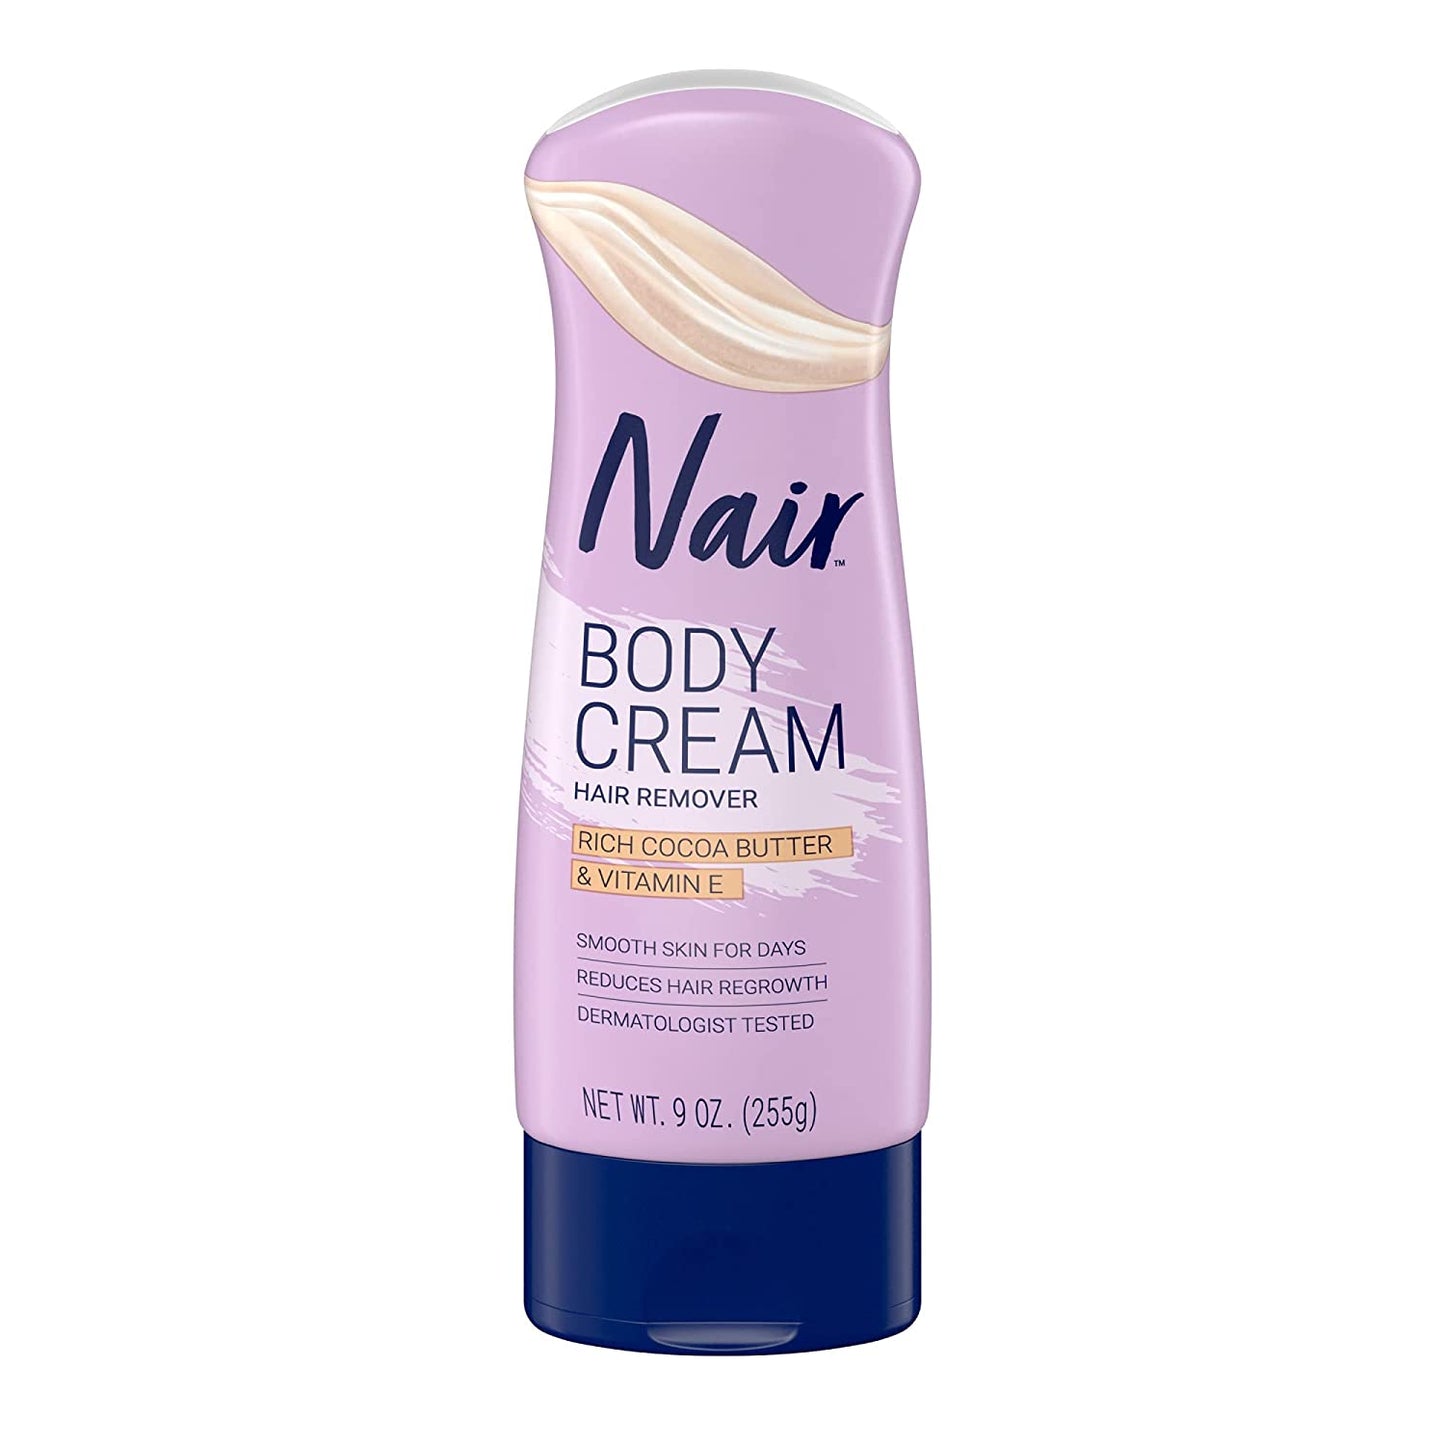 Nair Body Cream Hair Remover Rich Cocoa Butter & Vitamin E Smooth Skin For Days - 255g